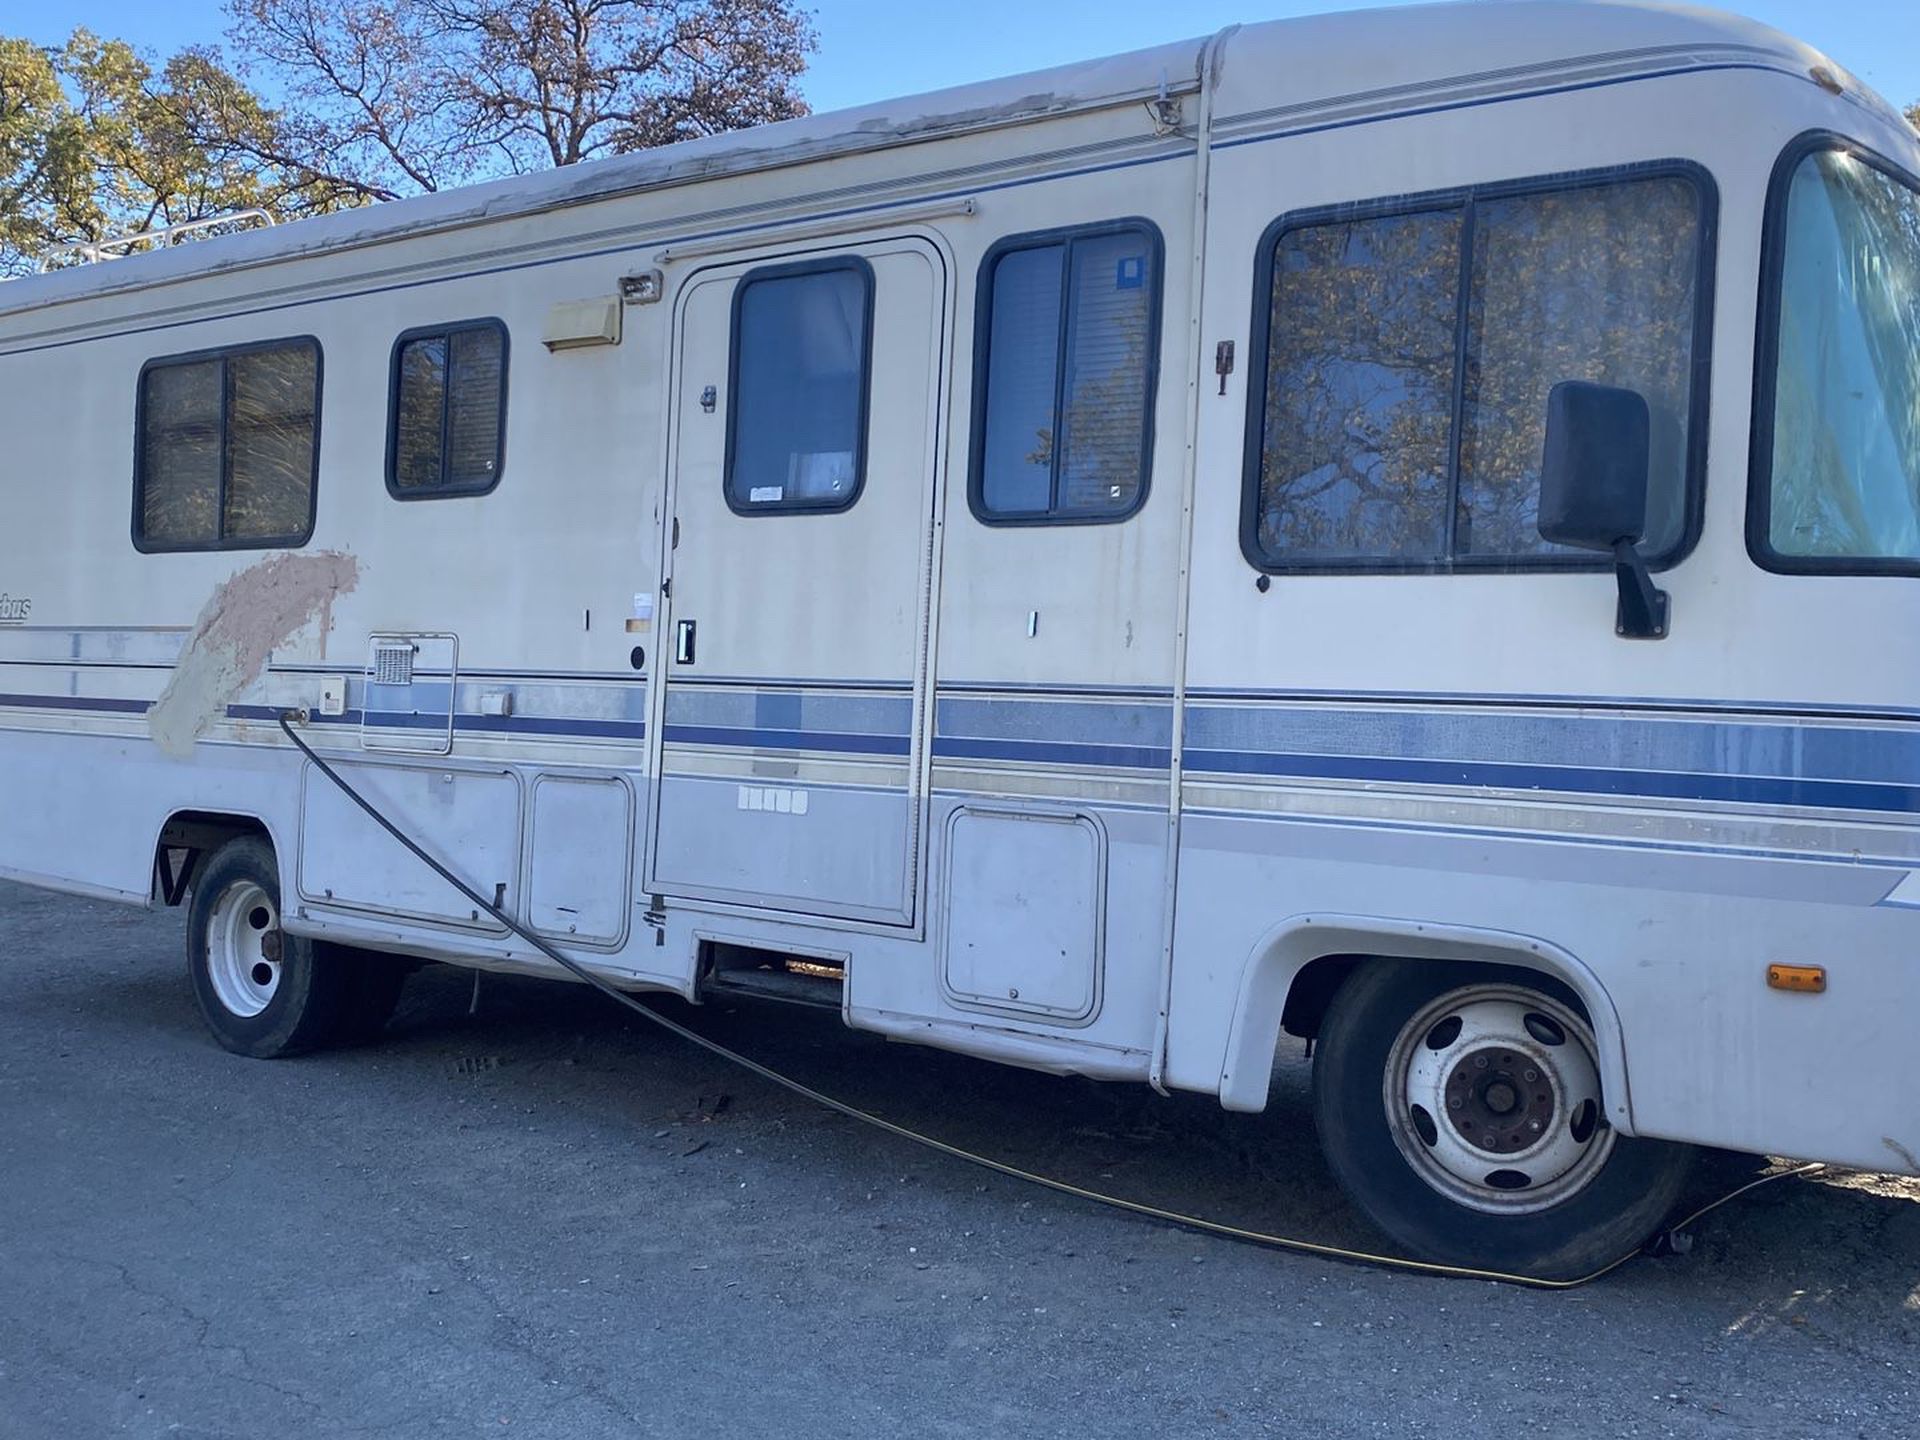 1993 Aerobus with hydronic wheel chair lift works great! Trades welcome! Need a big truck to tow fifth wheel!